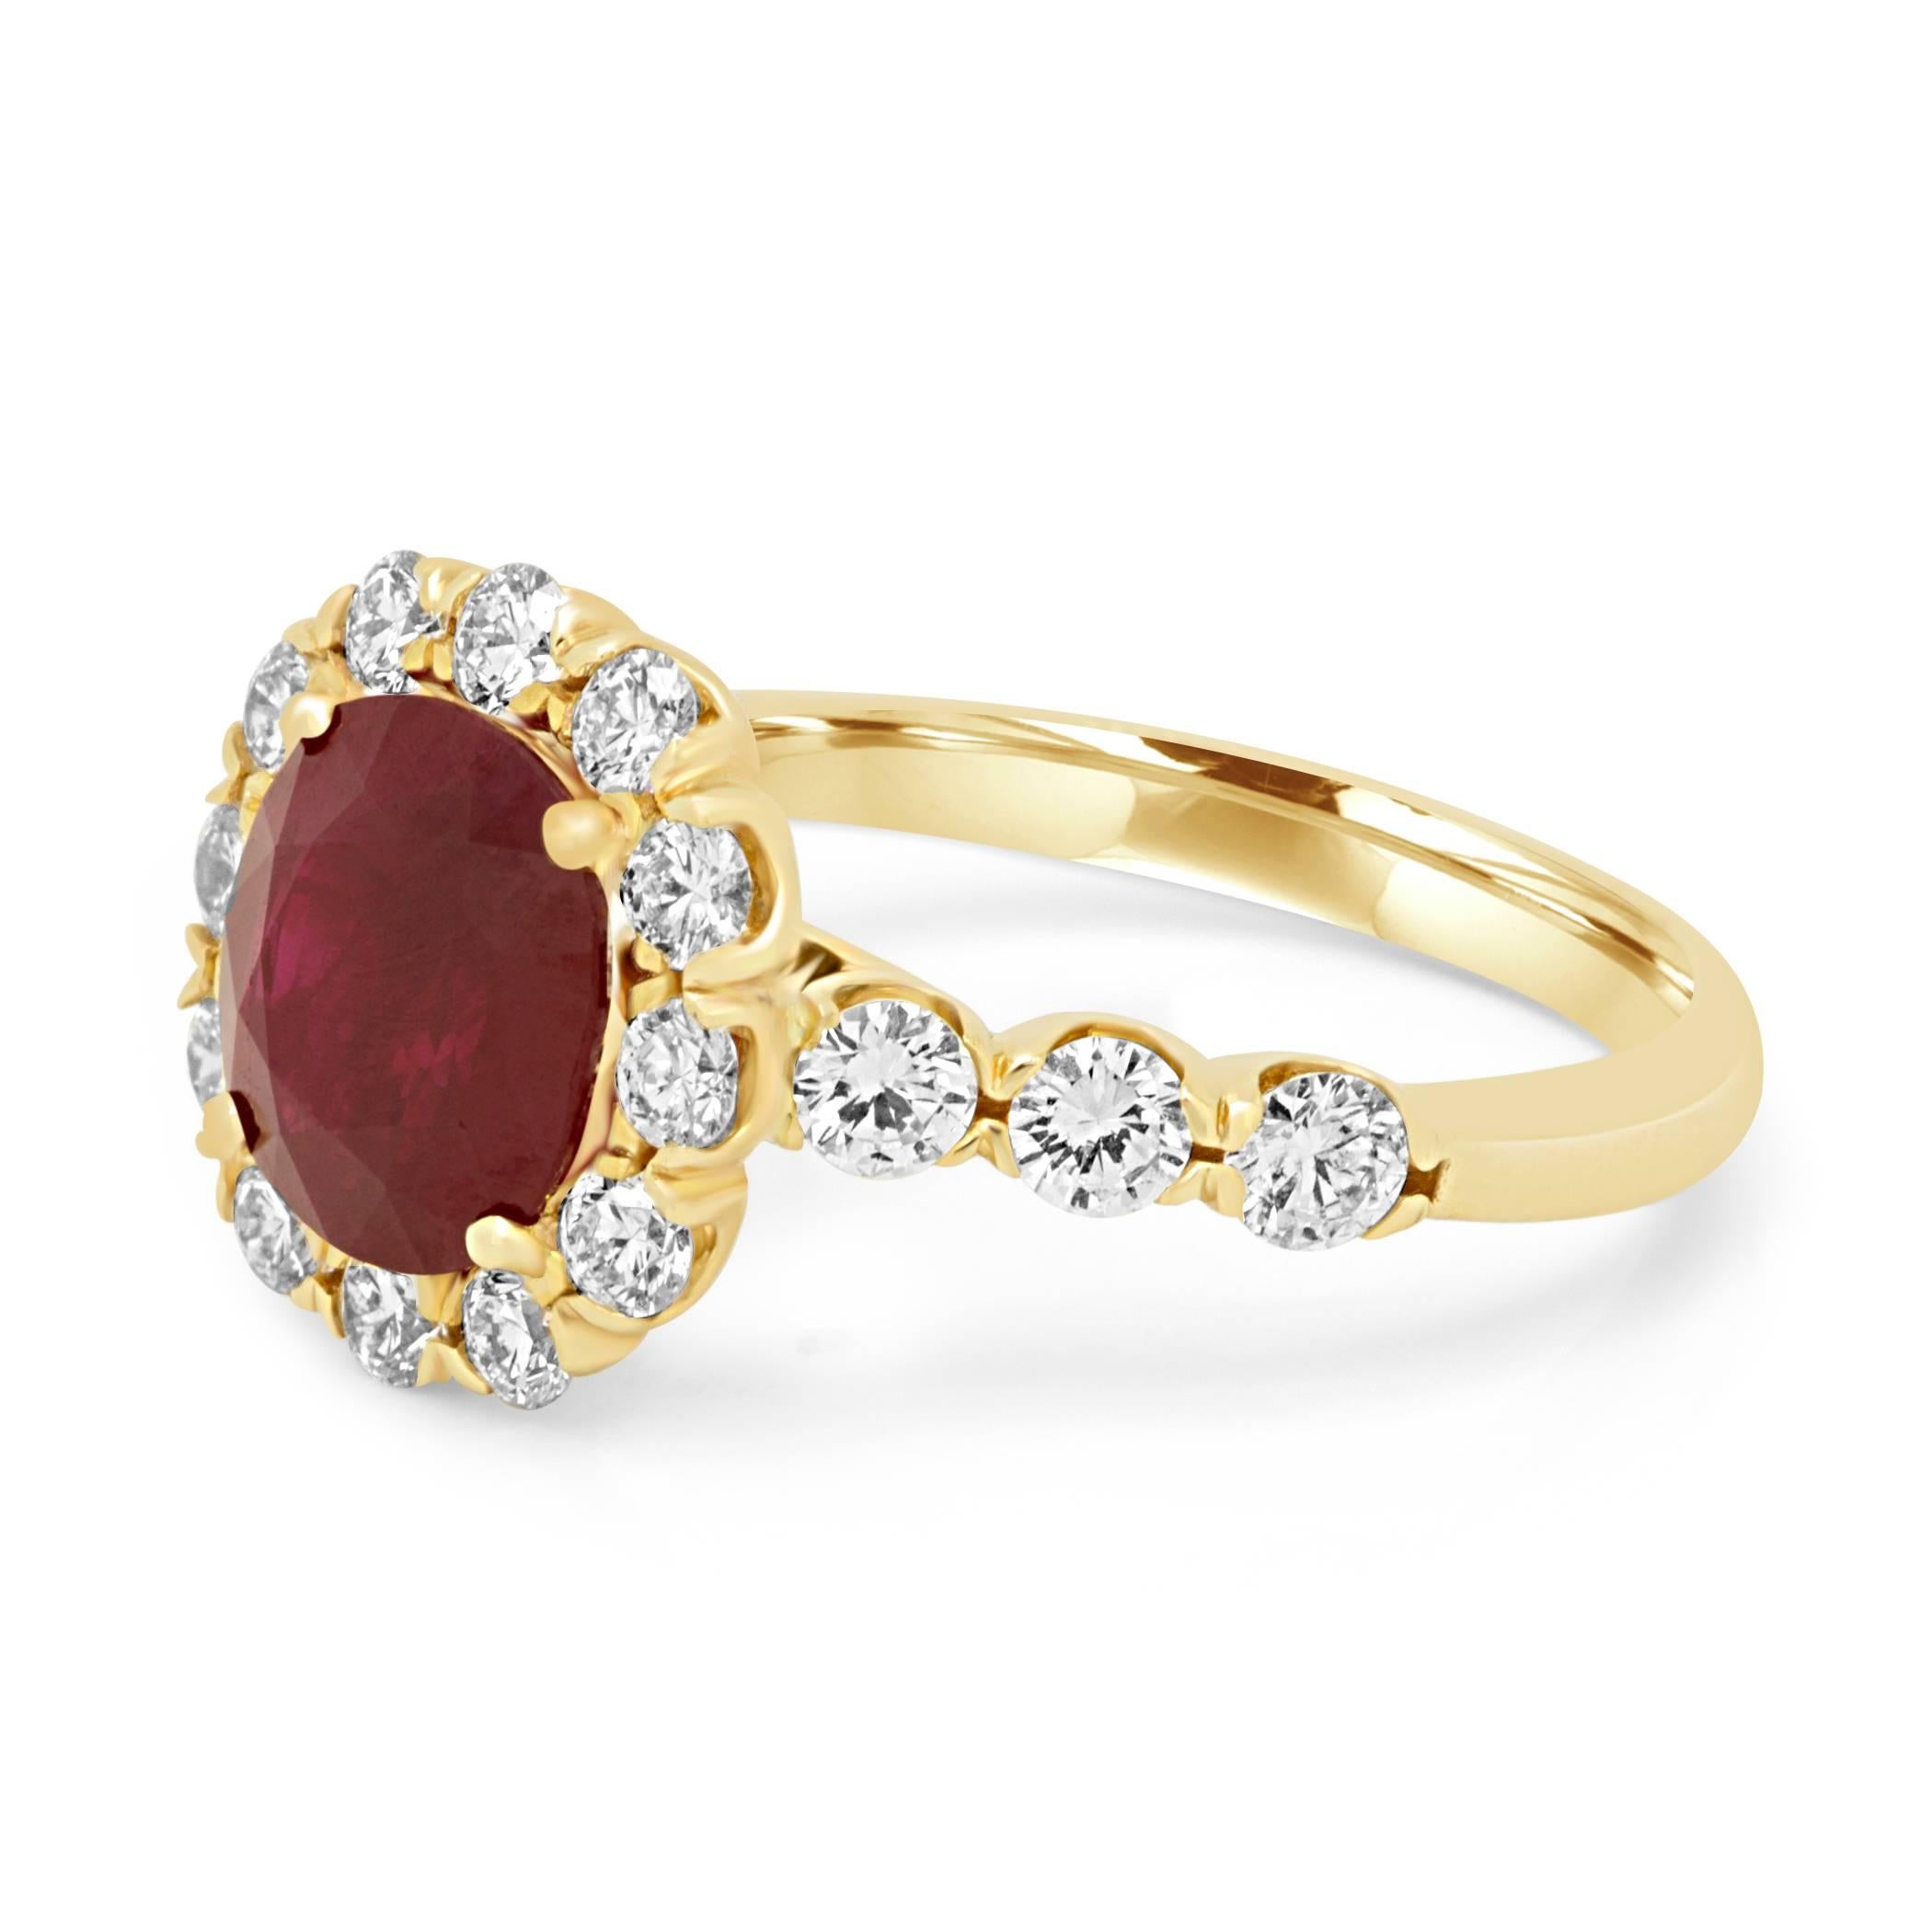                          
GIA Certified Burma Ruby Cushion 2.33 Carat encircled in a single halo of white round diamonds 1.02 Carat in a stunning 14K Yellow Gold Fashion Bridal Ring.

Style available in different price ranges. Prices are based on